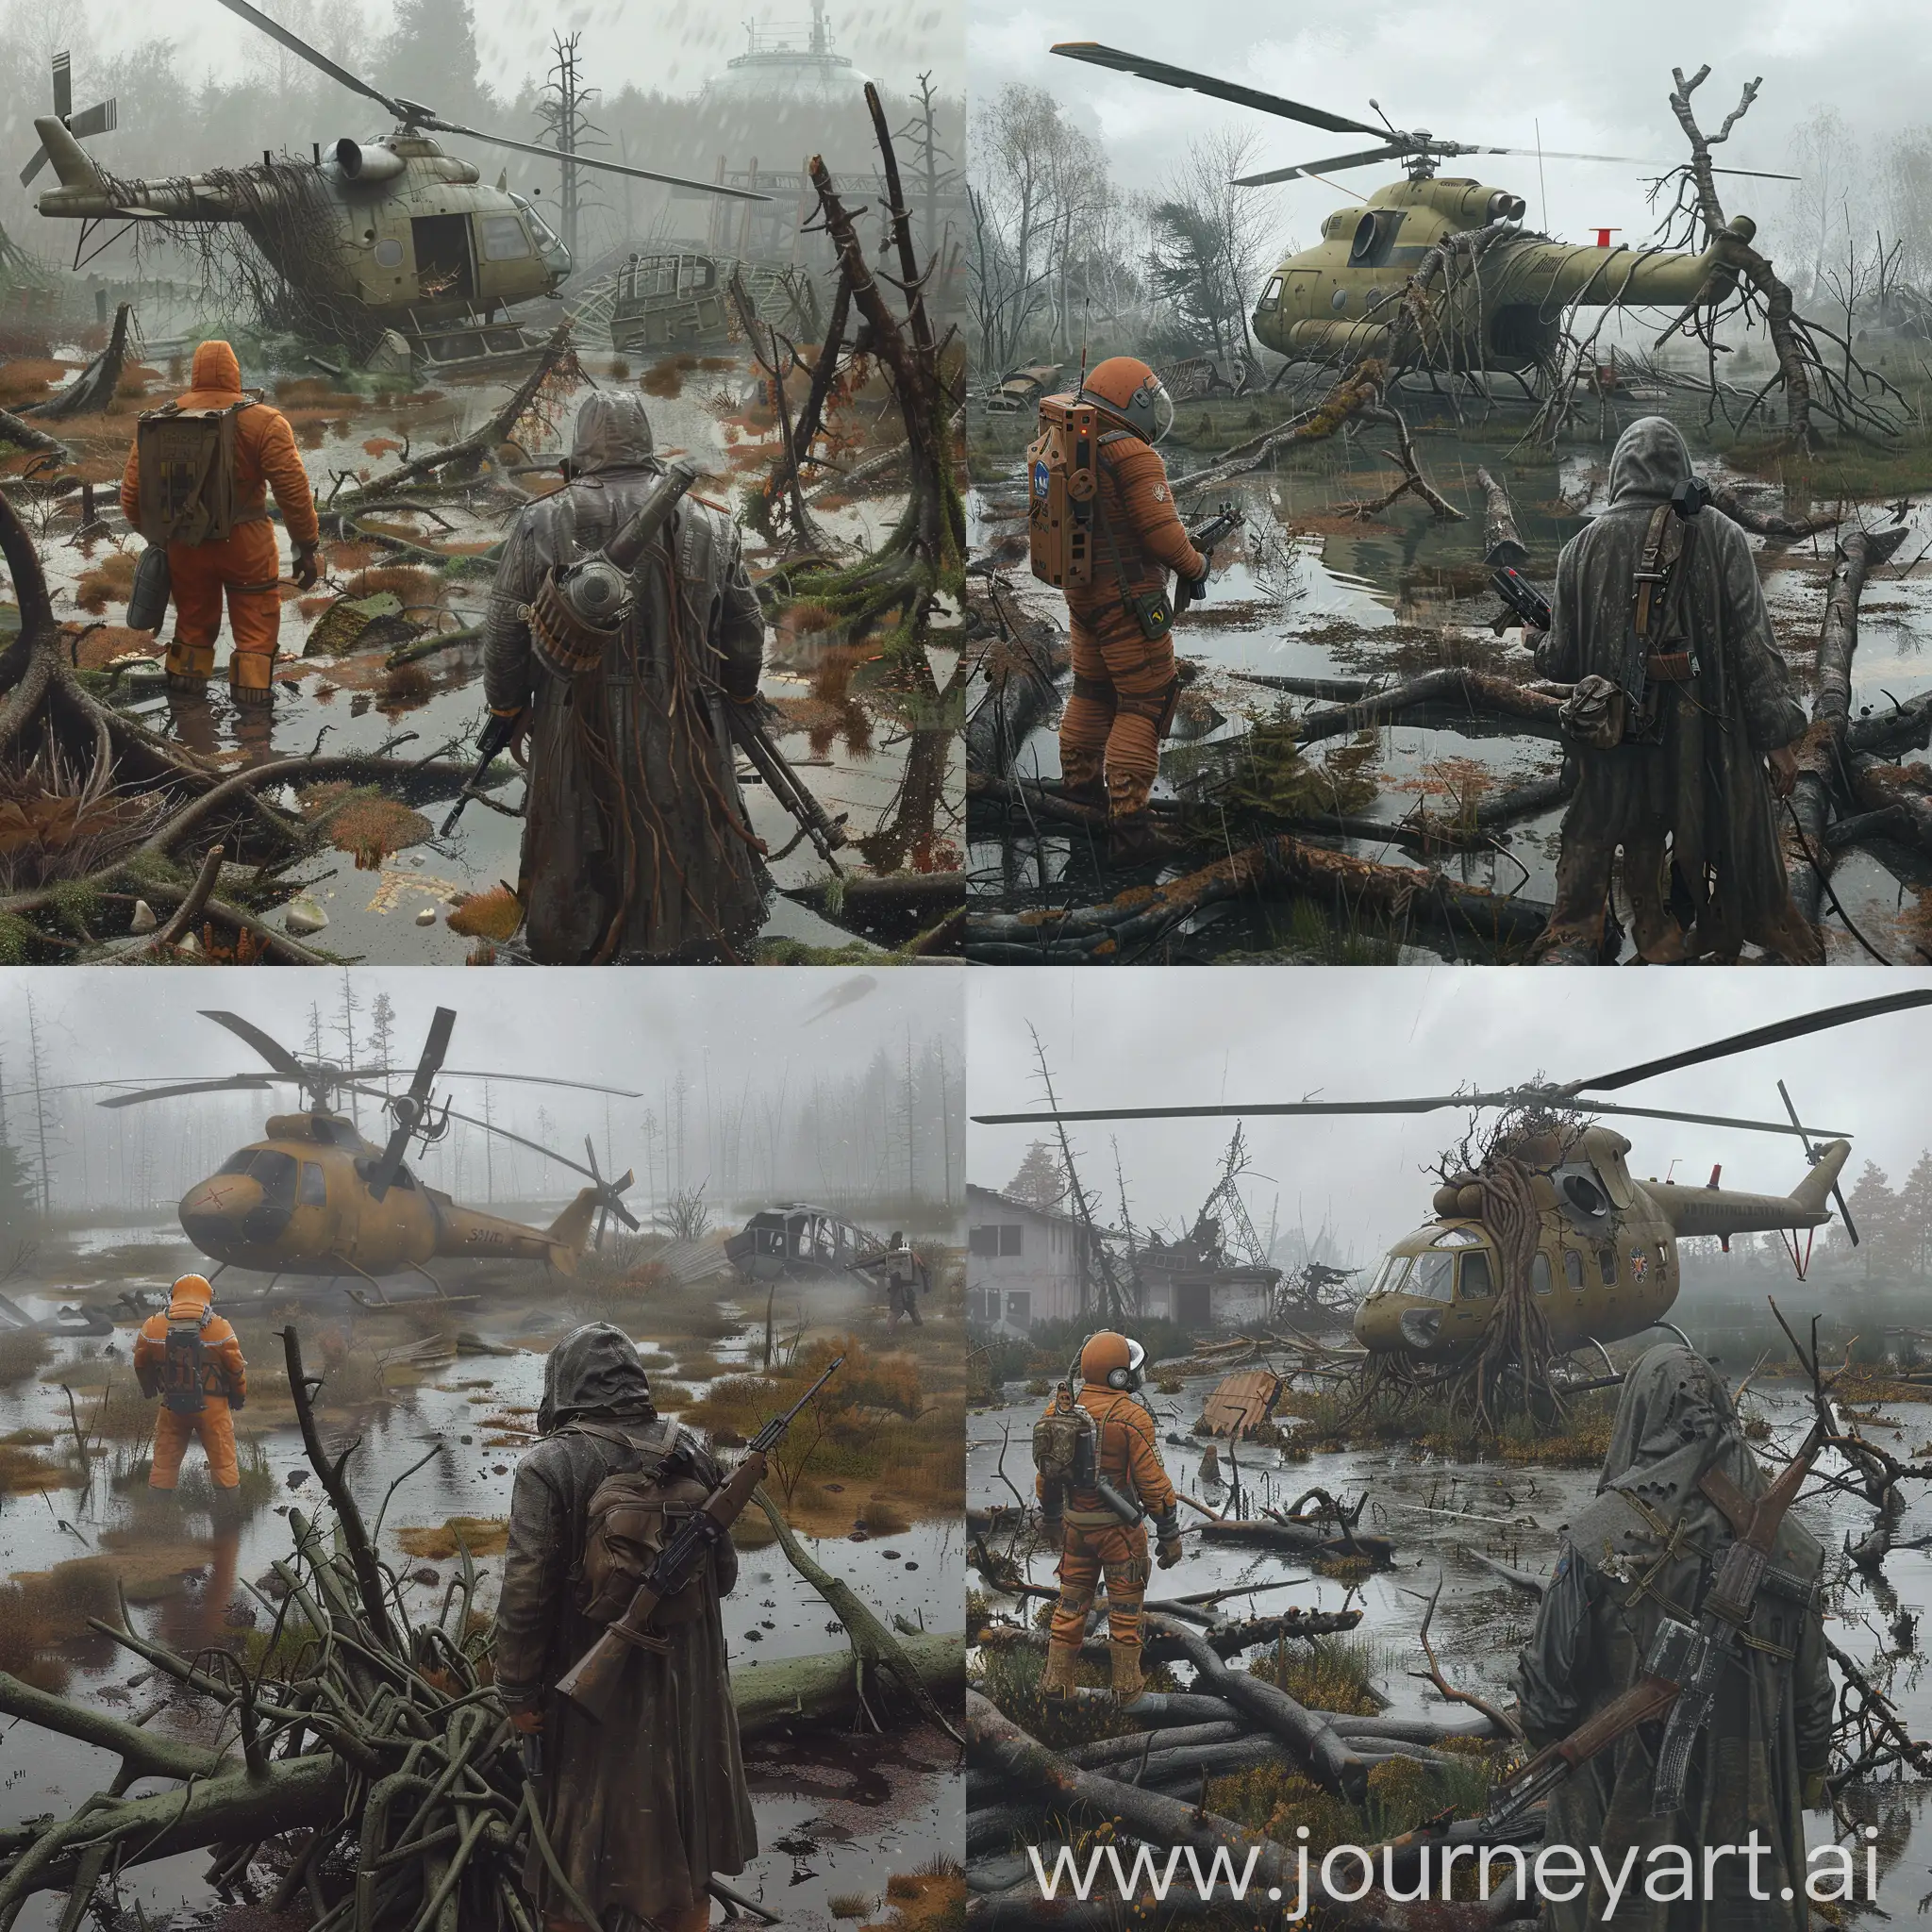 S.T.A.L.K.E.R. art, a dirty toxic swamp, abandoned Chernobyl, an abandoned village, a military helicopter that is wrapped in roots and destroyed, 2 characters, the first character is dressed in an orange Soviet space suit, in front of this character is a stalker in a dark gray dirty leather raincoat with a gas mask on his face with a small backpack on his back and with a Dragunov SVD sniper rifle in his hands, the weather is a gloomy autumn.